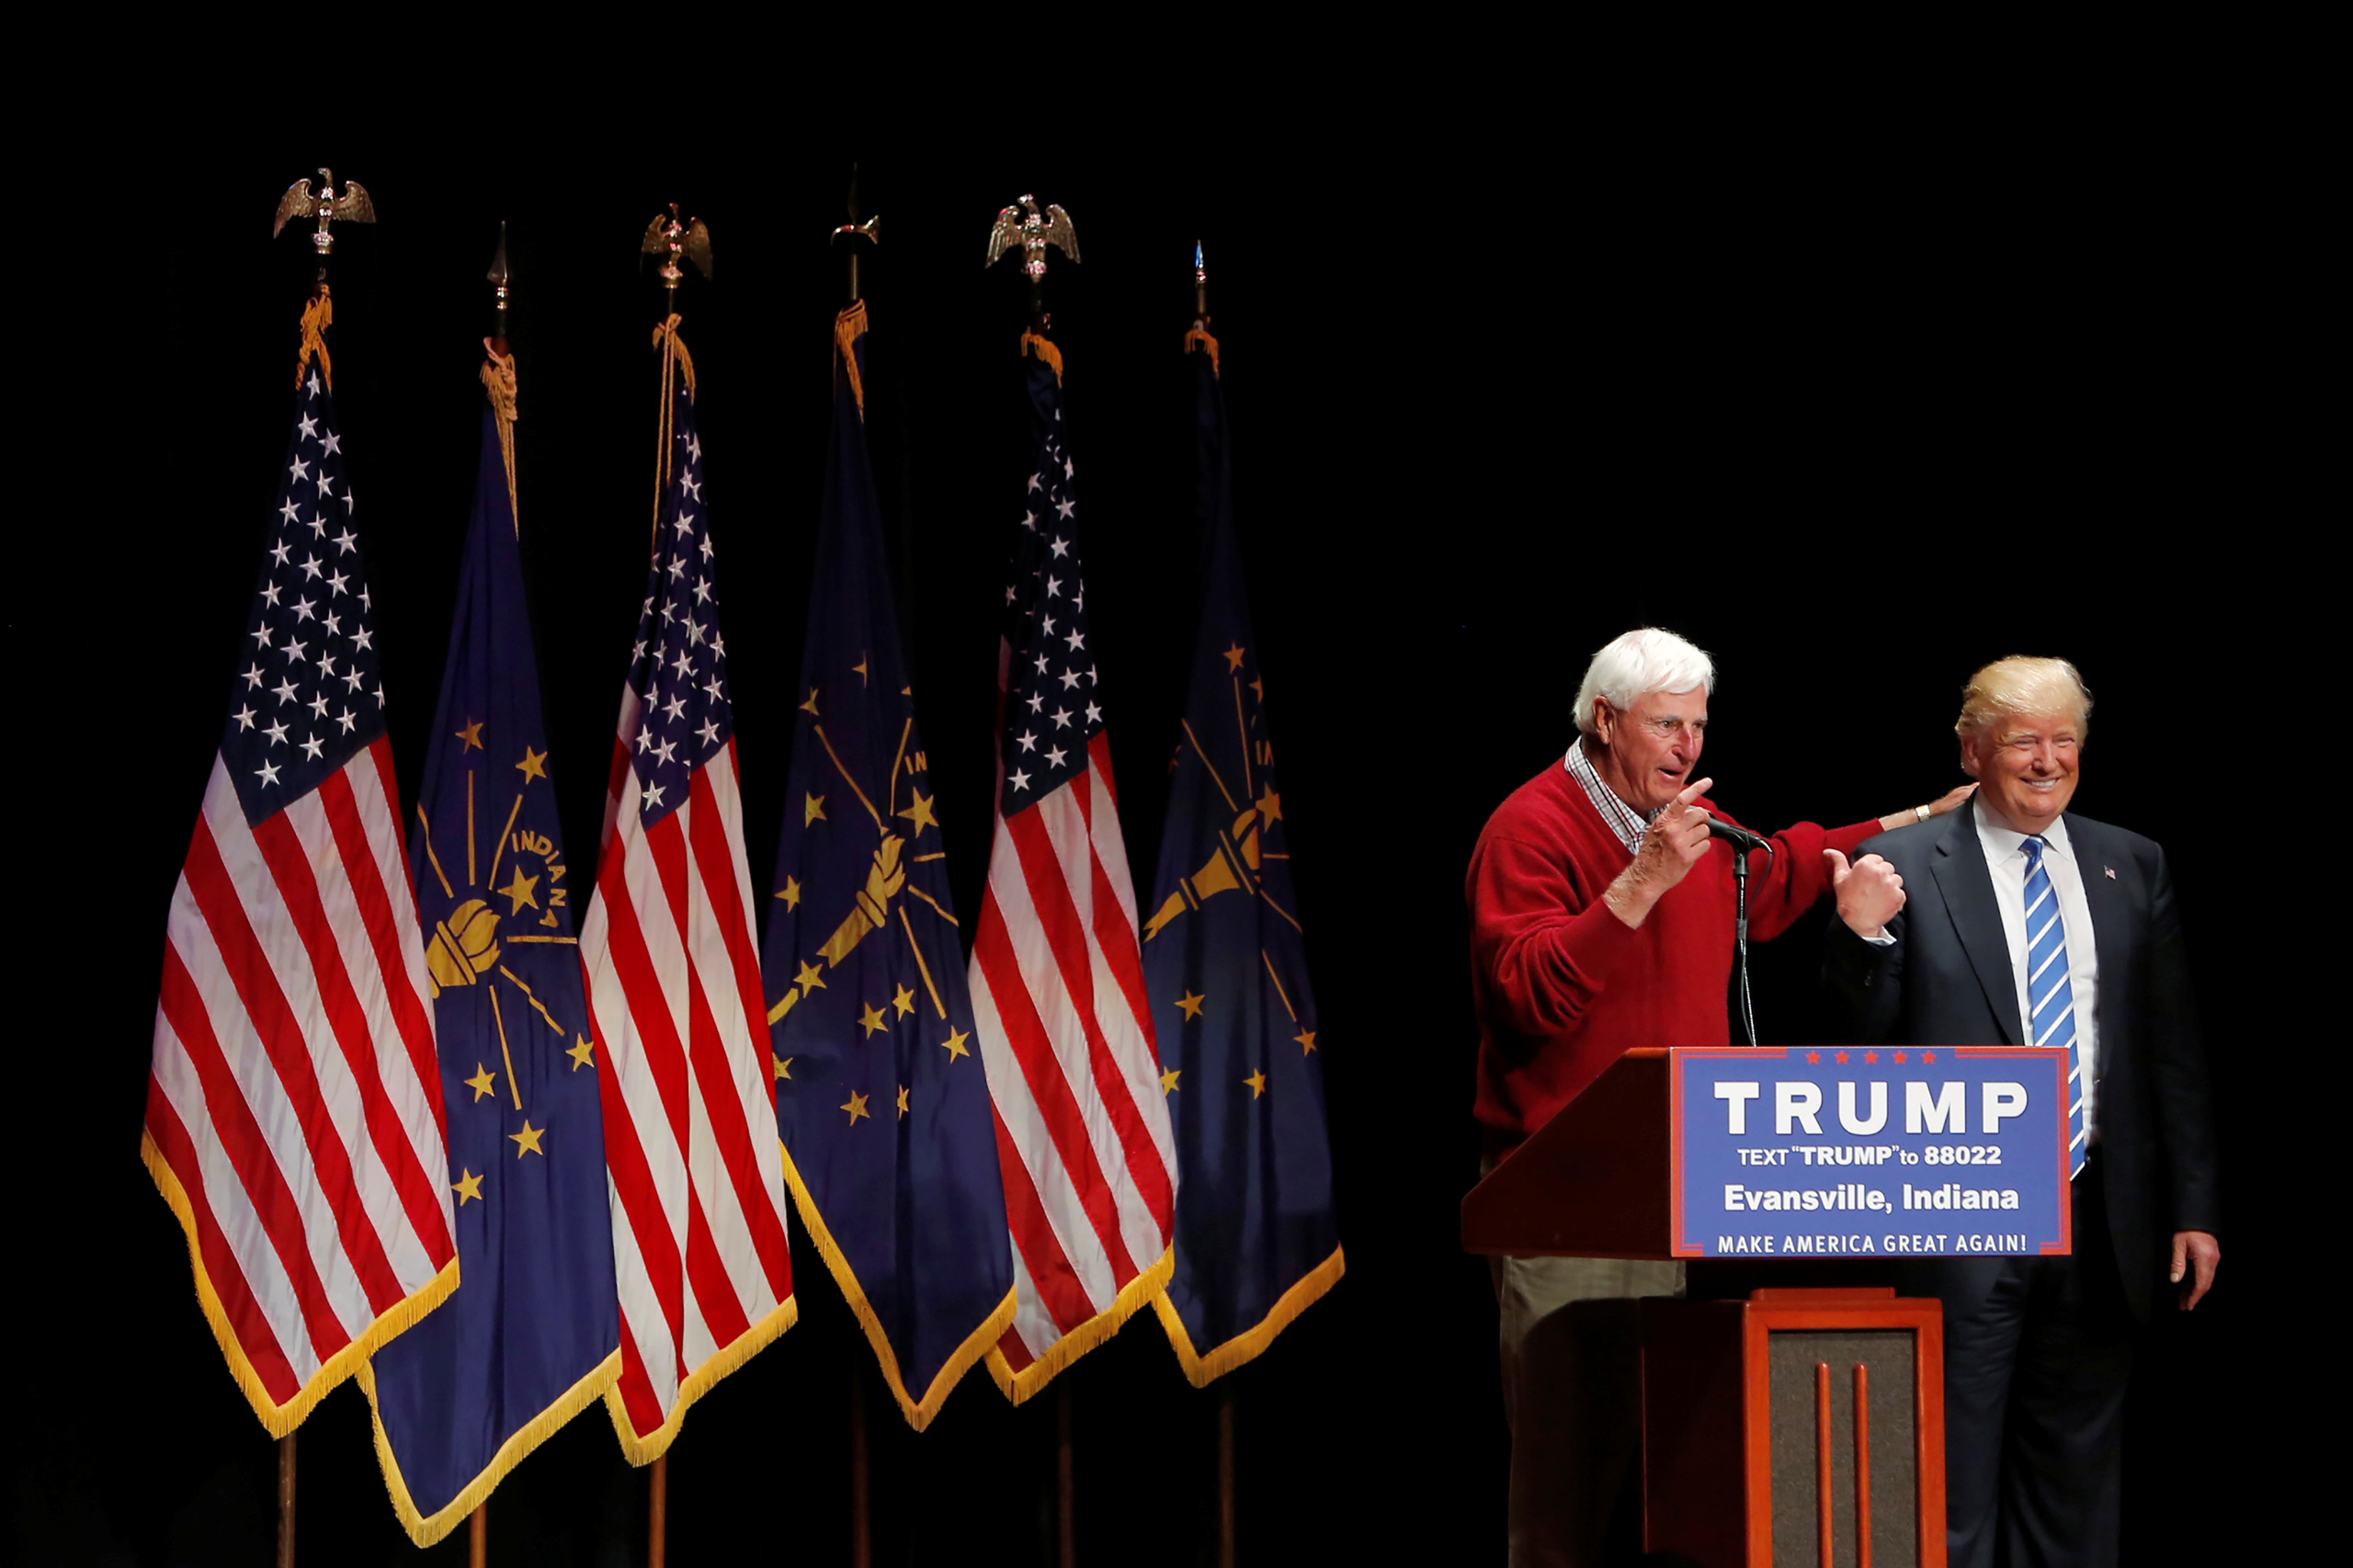 U.S. Republican presidential candidate Donald Trump is joined on stage by former Indiana University basketball coach Bob Knight at a campaign event at the Old National Events Plaza in Evansville, Indiana, U.S., April 28, 2016.  REUTERS/Aaron P. Bernstein - RTX2C3PM